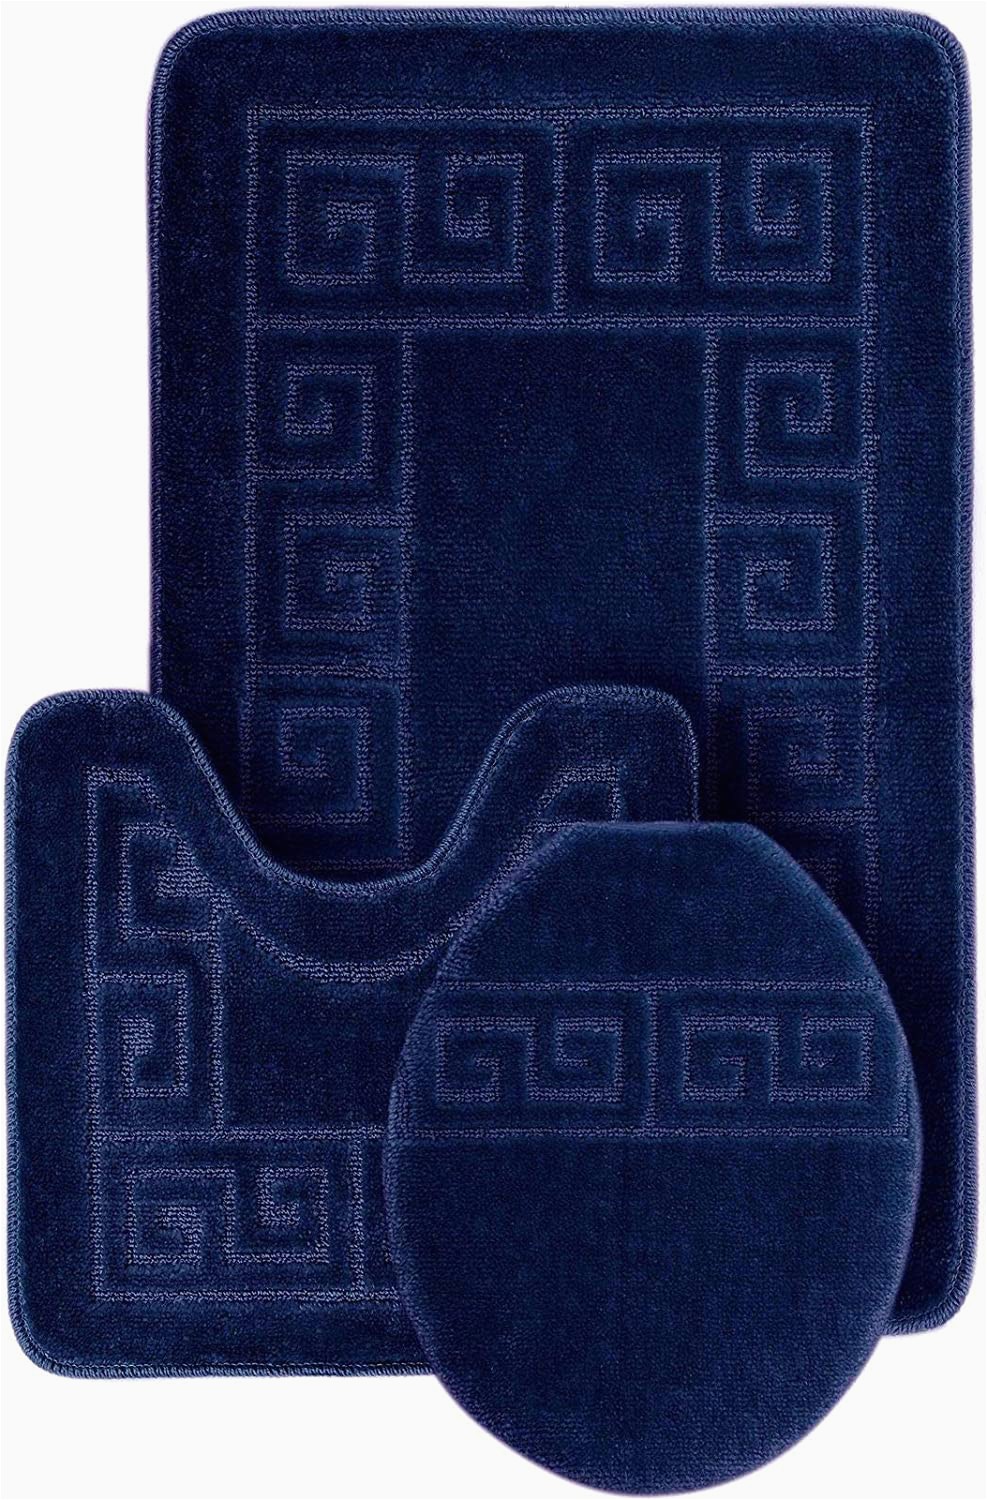 Amazon Large Bathroom Rugs Wpm World Products Mart Bathroom Rugs Set 3 Piece Bath Pattern Rug 20"x32" Contour Mats 20"x20" with Lid Cover Navy